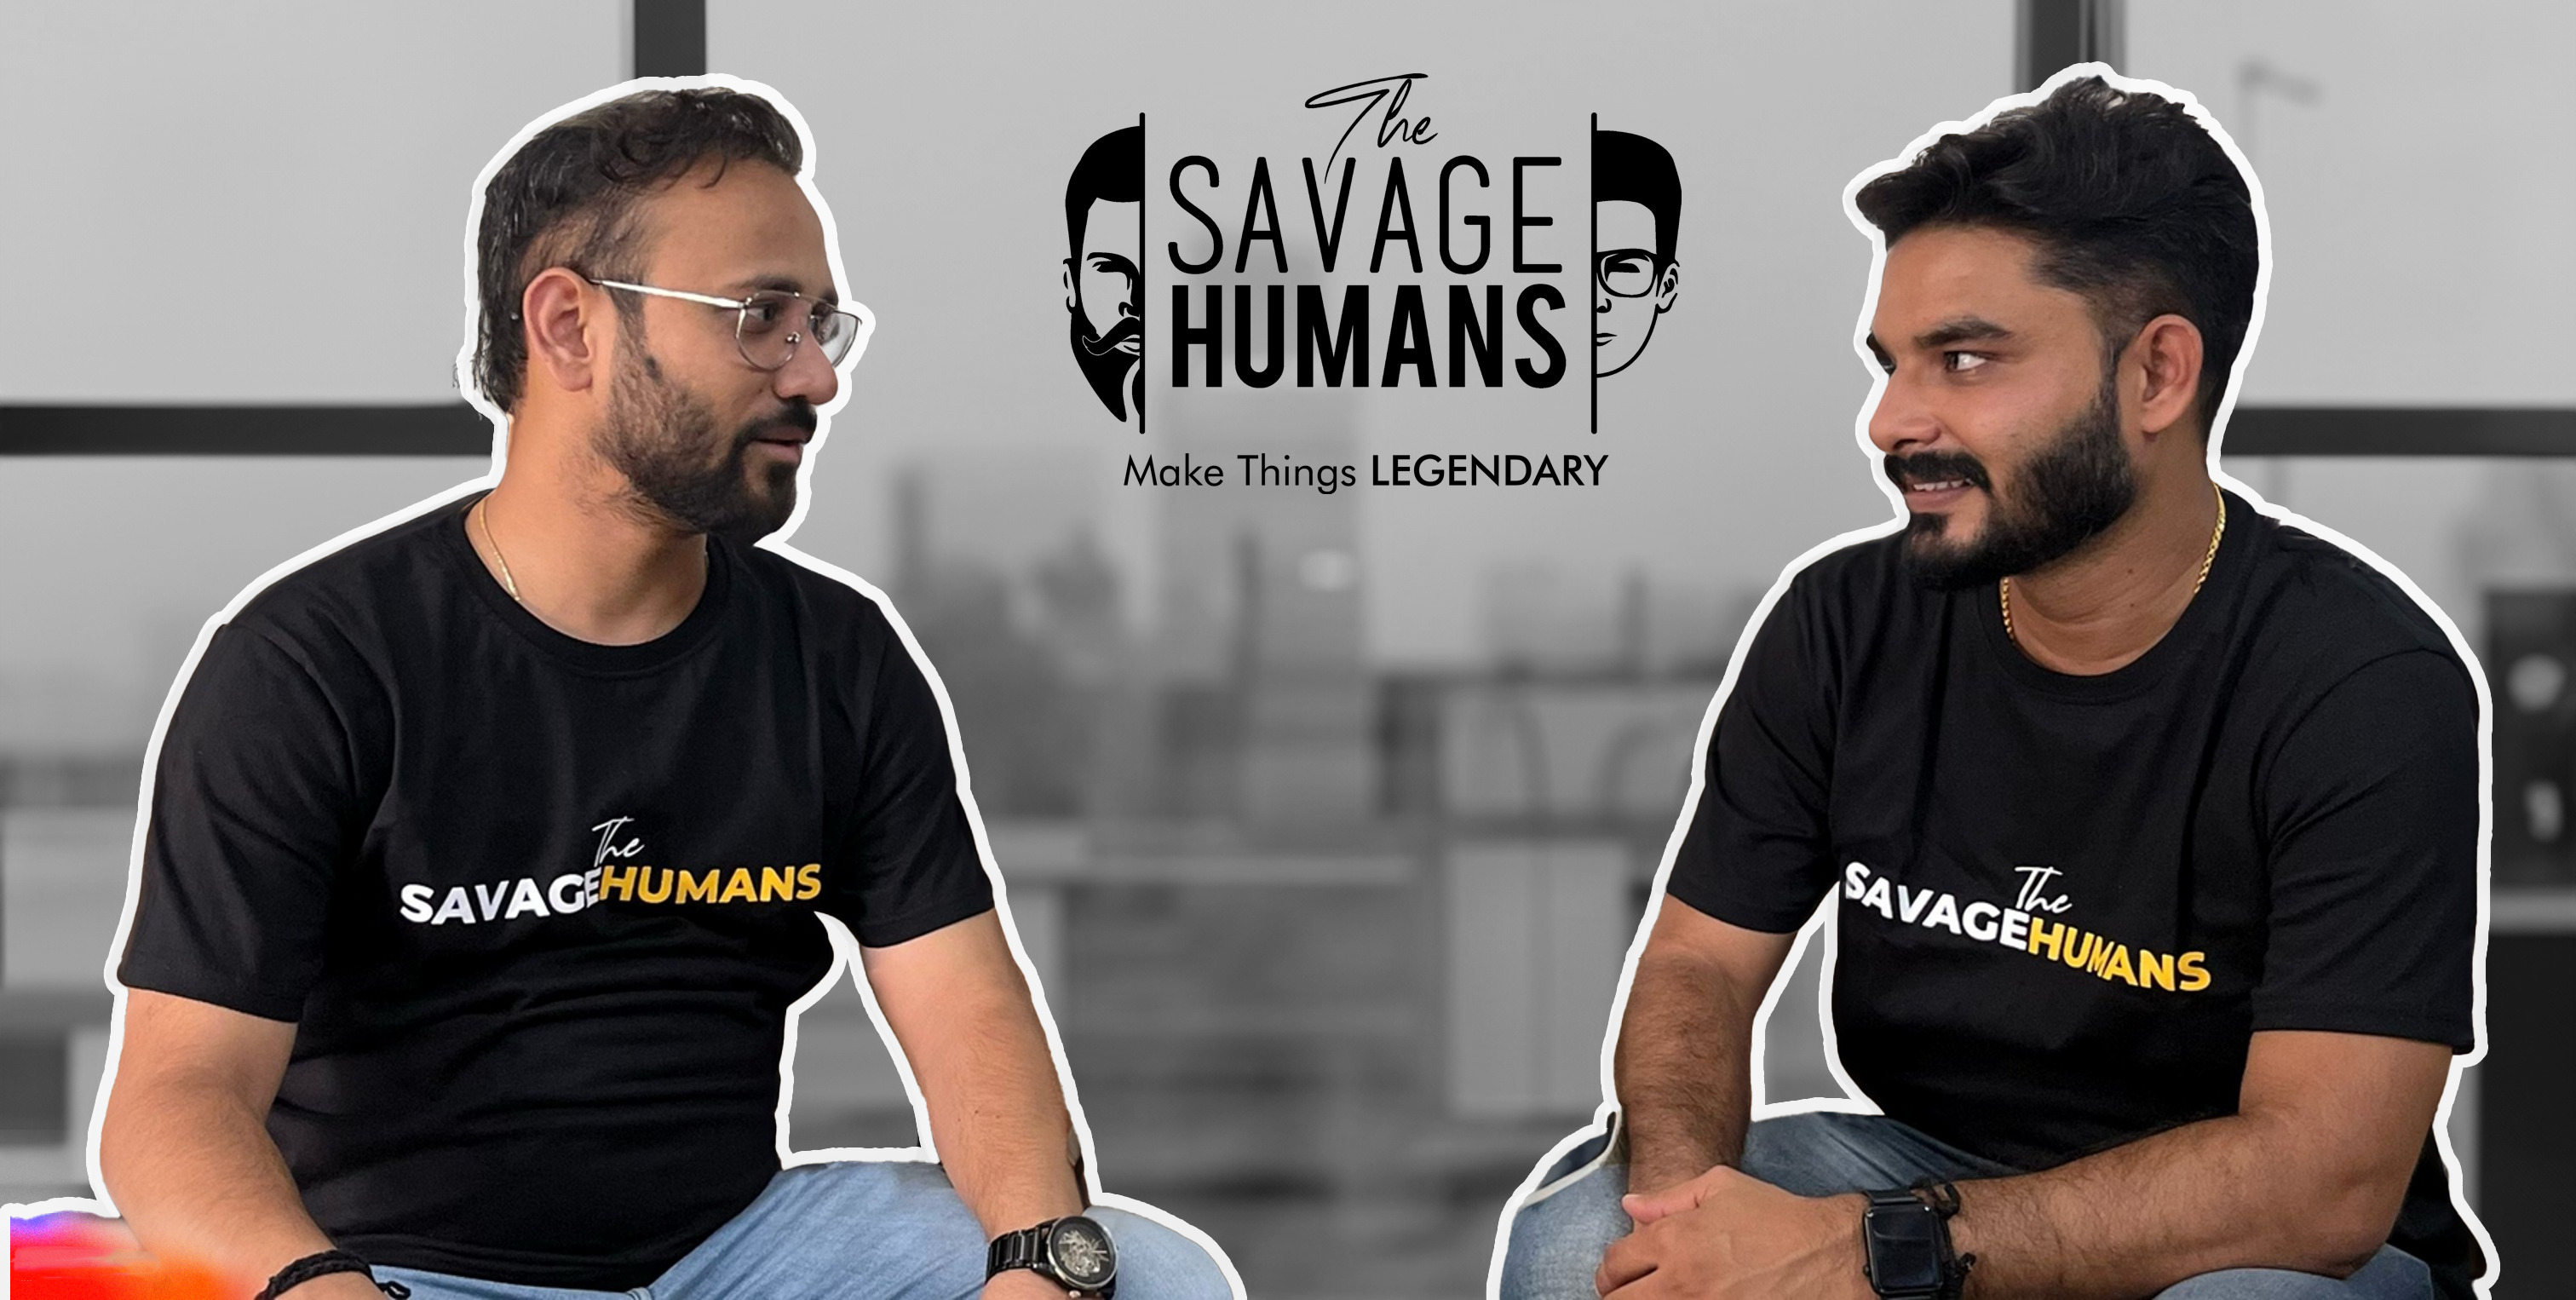 The savage humans founders